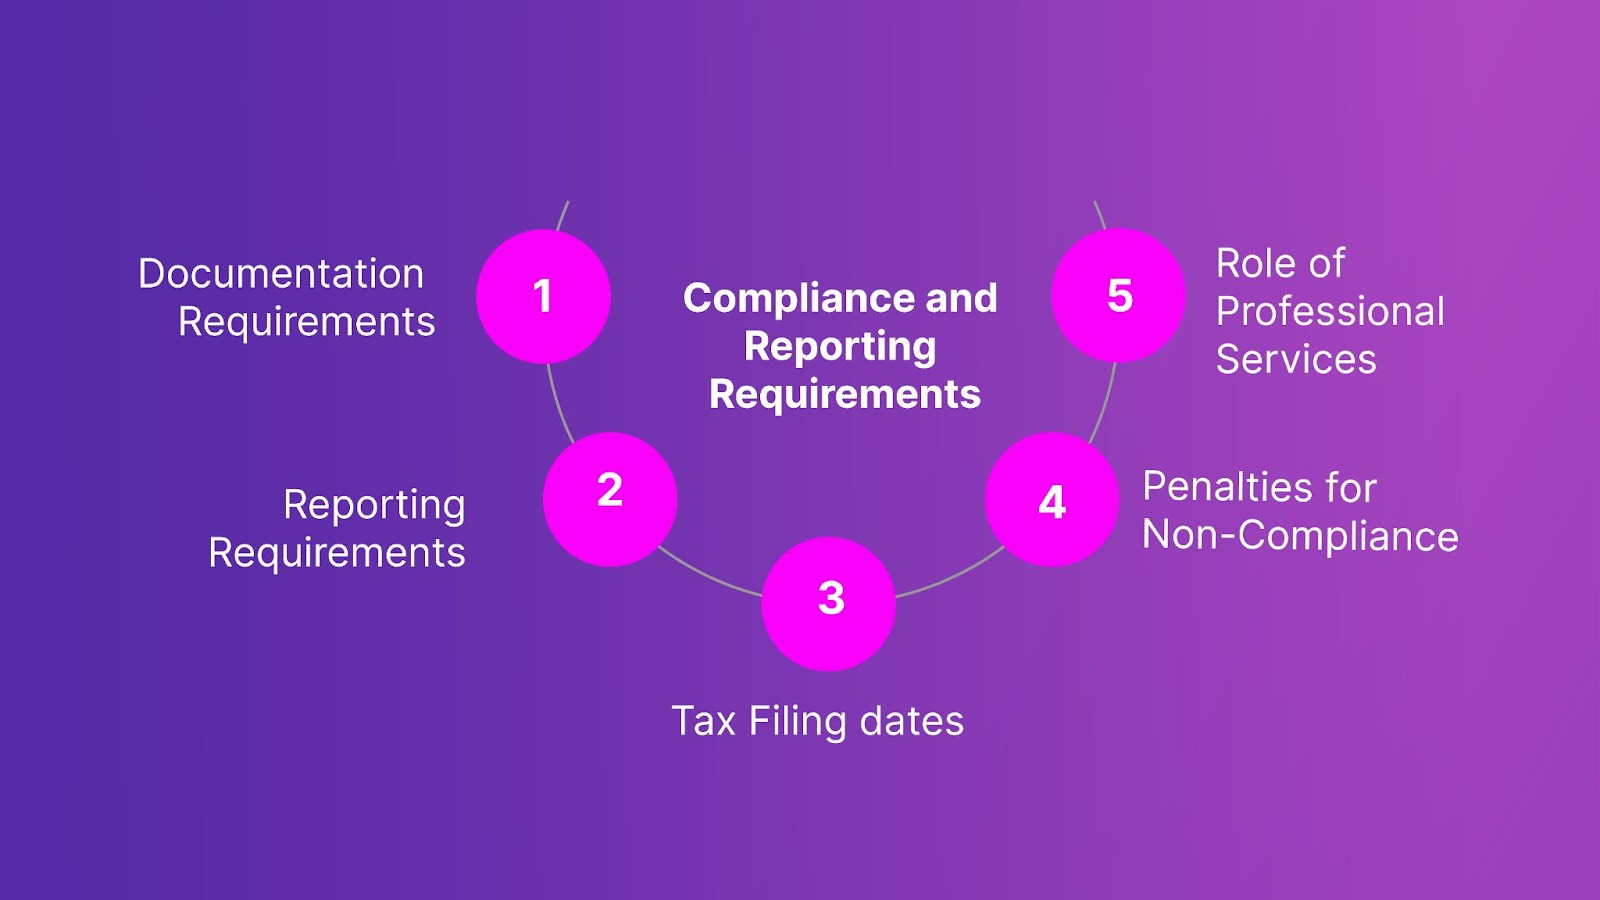 Compliance and Reporting Requirements